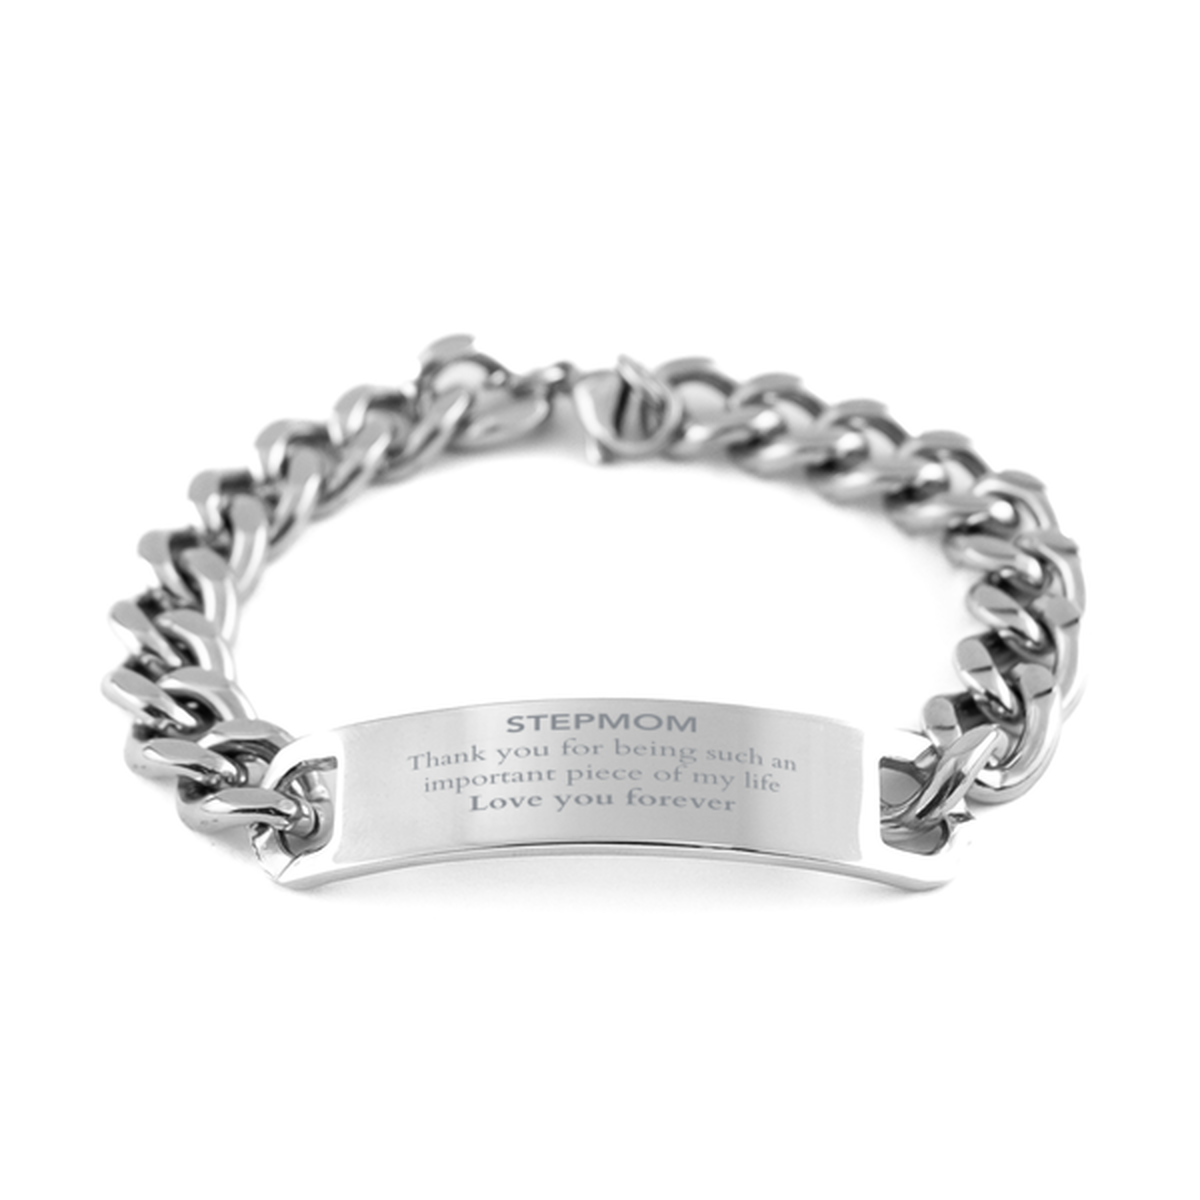 Appropriate Stepmom Cuban Chain Stainless Steel Bracelet Epic Birthday Gifts for Stepmom Thank you for being such an important piece of my life Stepmom Christmas Mothers Fathers Day